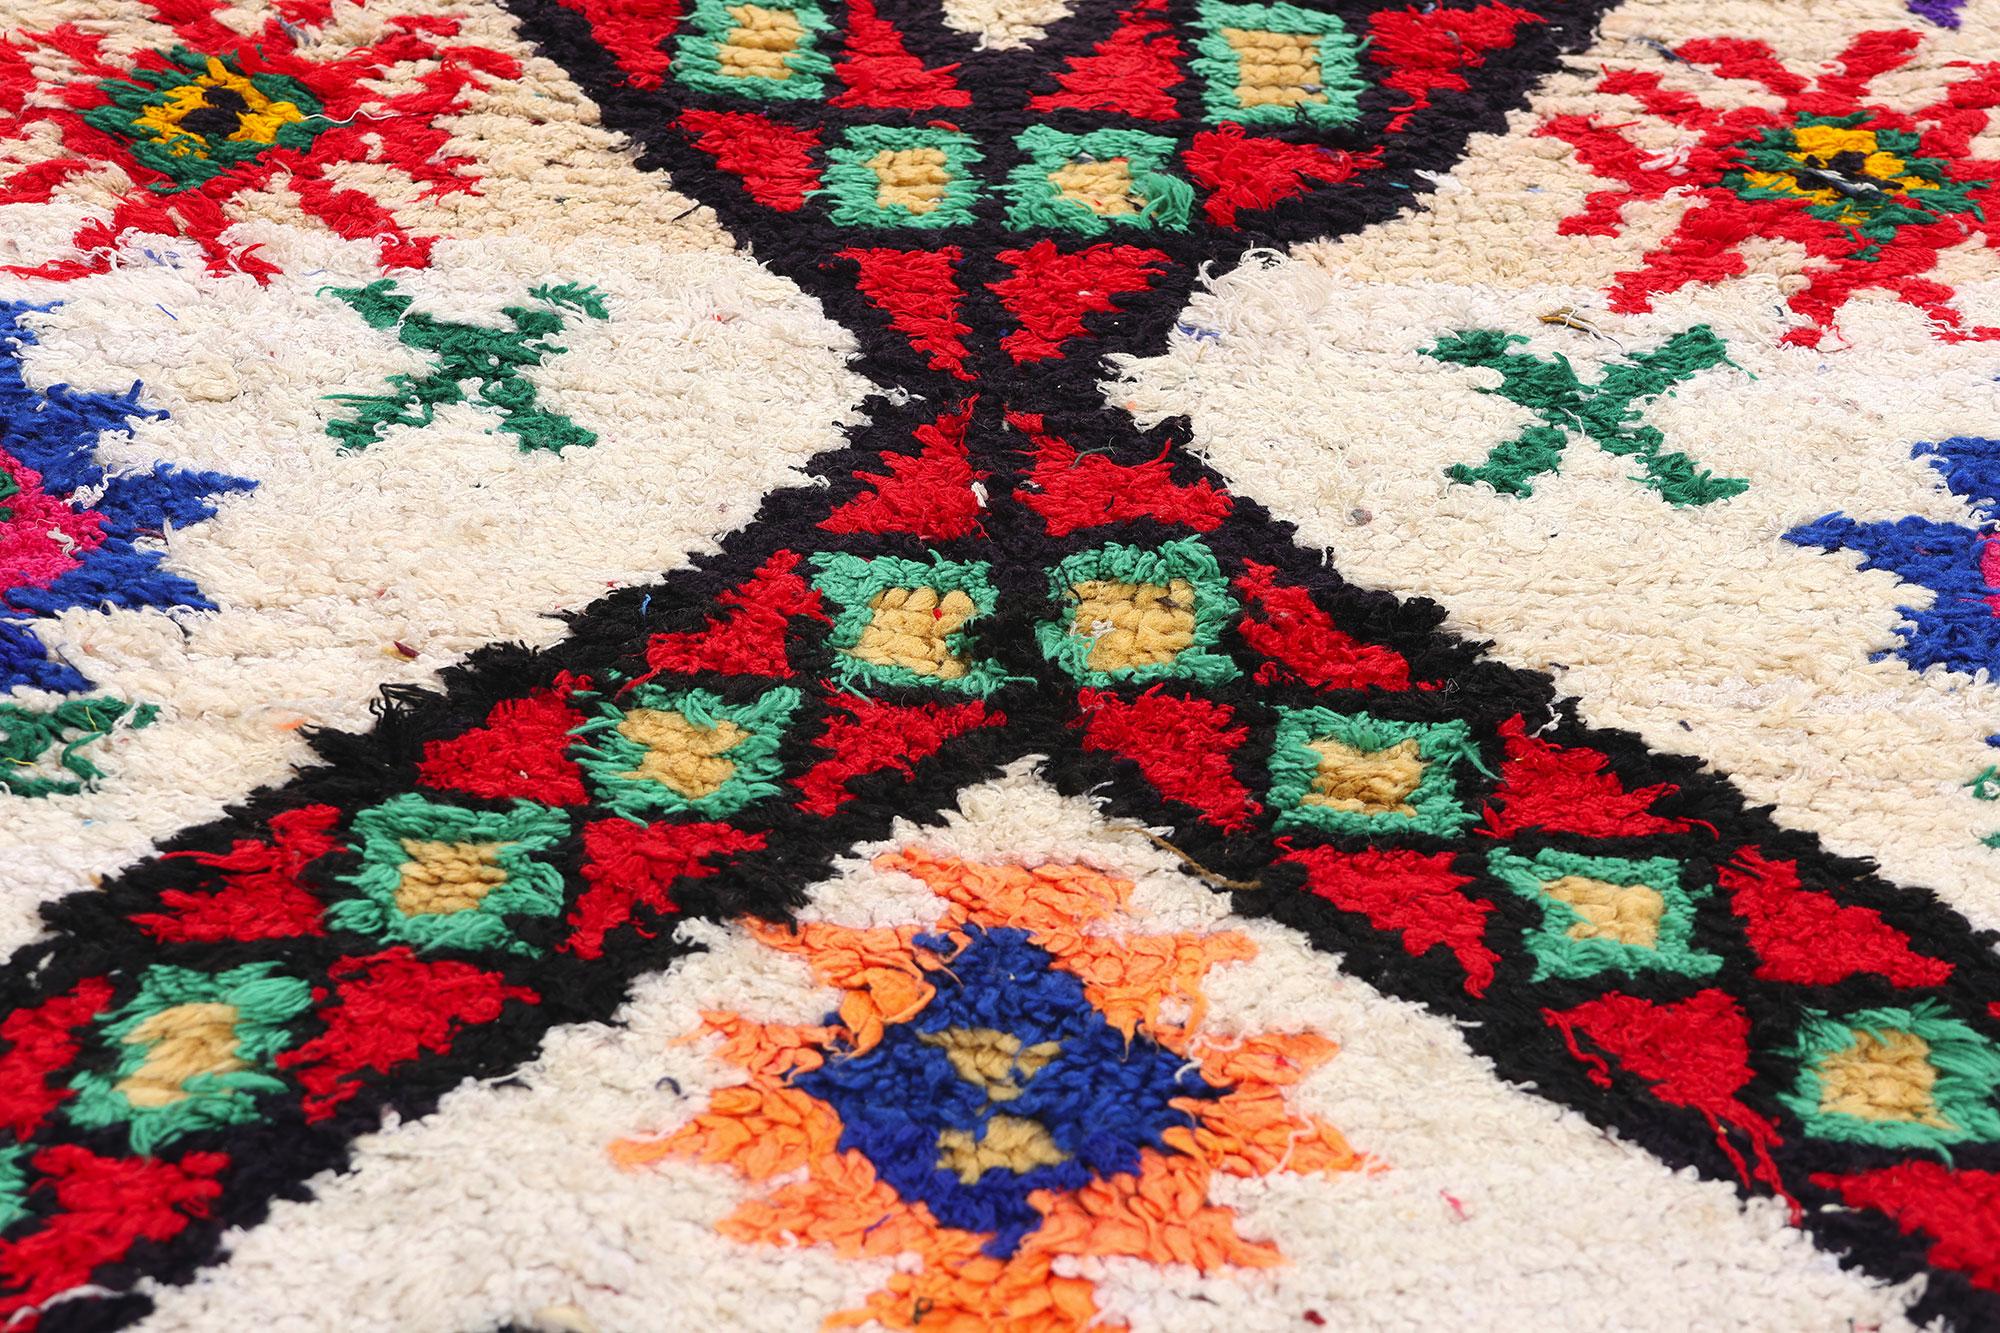 20th Century Vintage Berber Moroccan Azilal Rug, Boho Chic Meets Cozy Tribal Enchantment For Sale